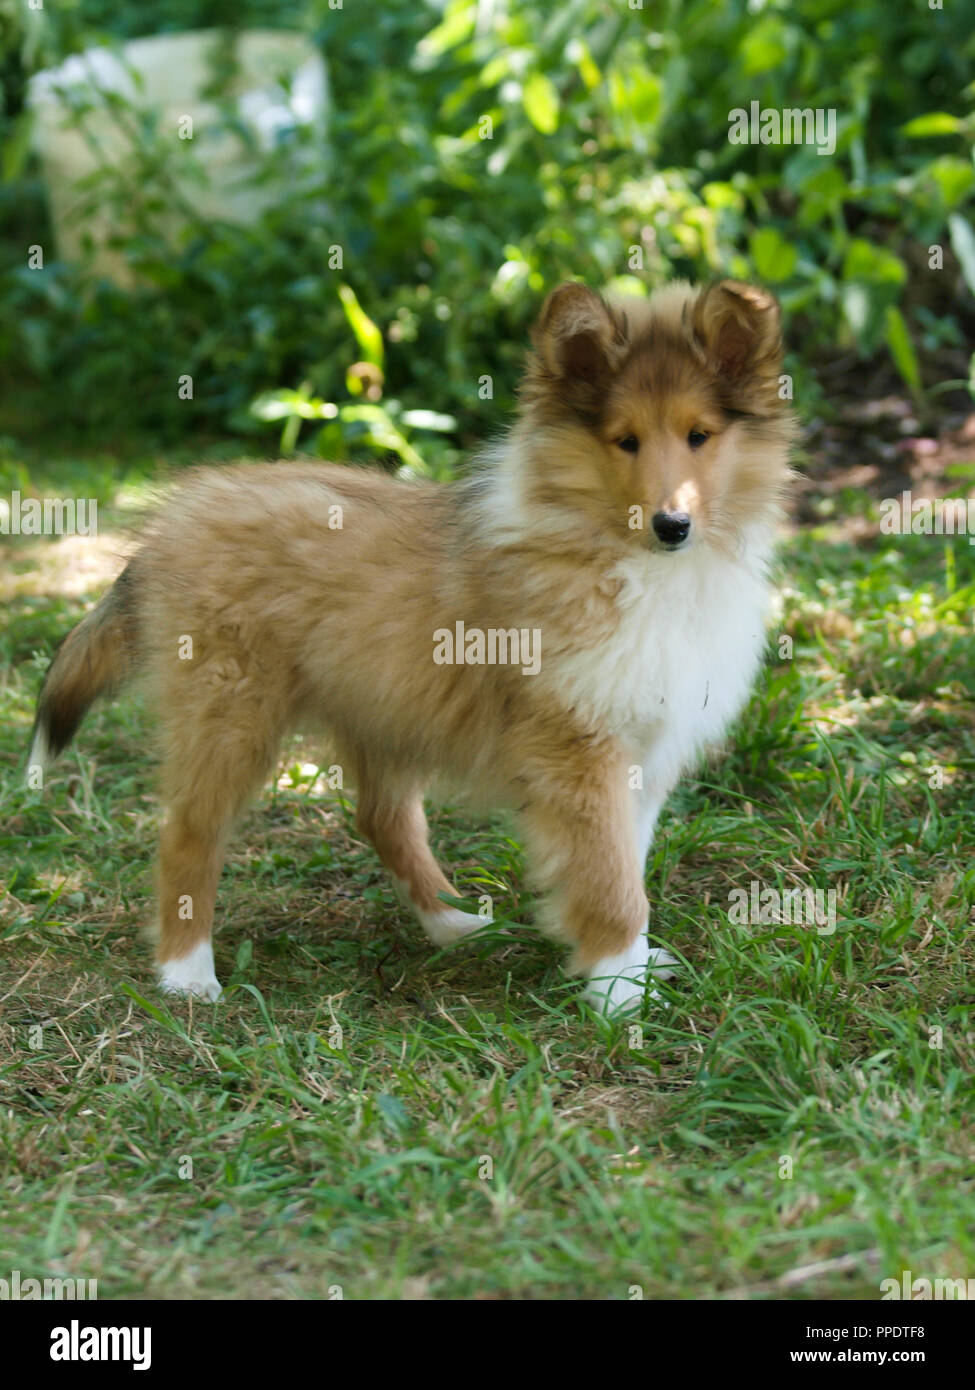 A cute Rough Collie puppy in the garden Stock Photo - Alamy